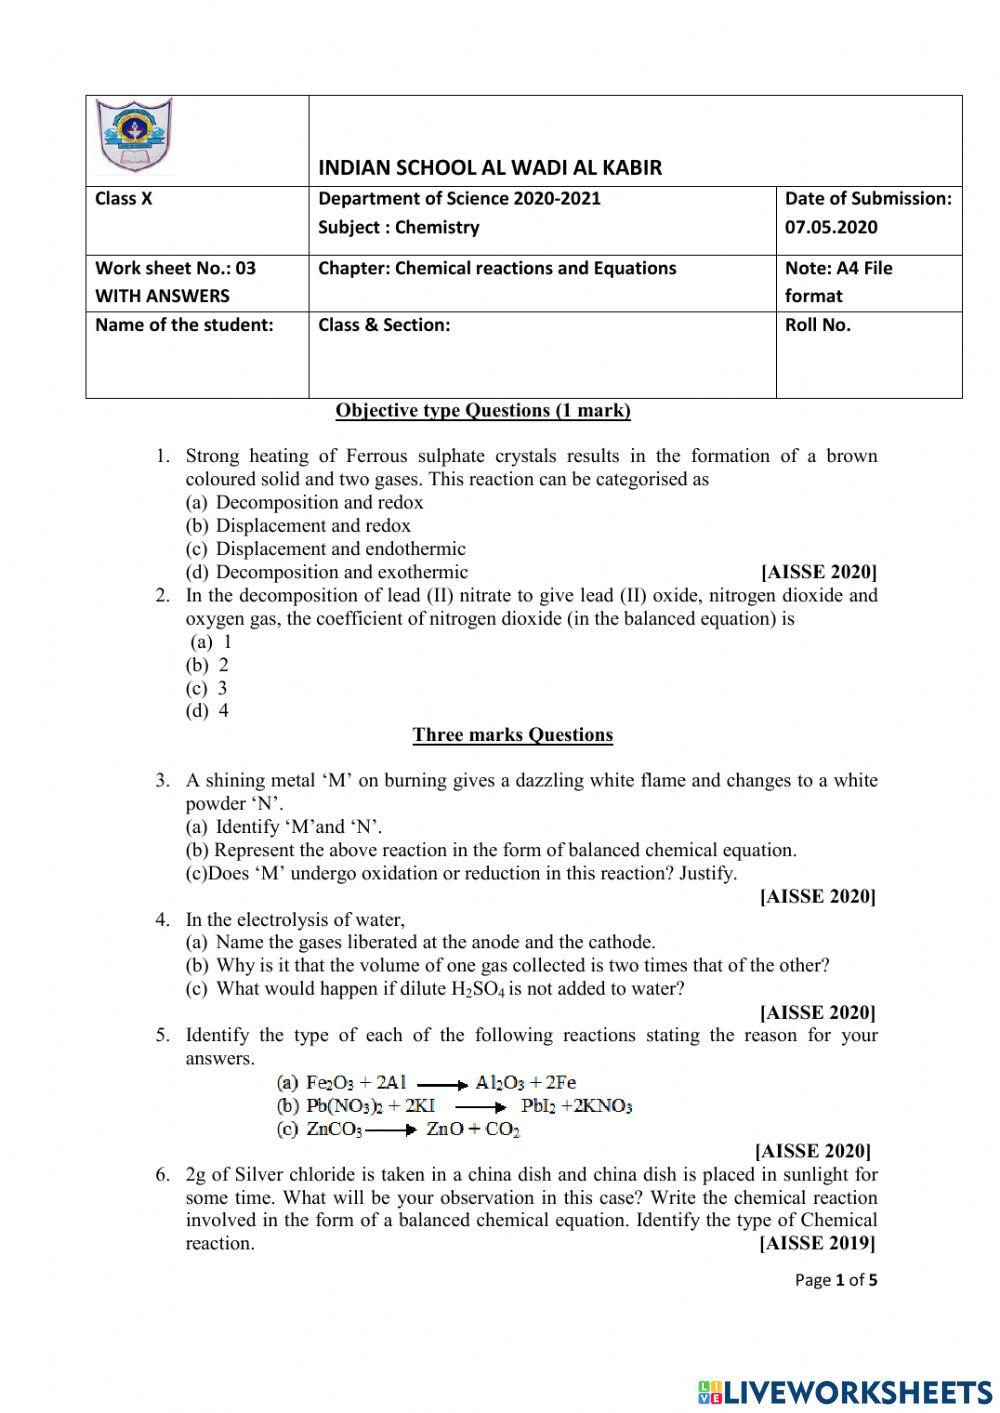 Class 10 -science-chemistry- chemical reactions and equations -ws -jenesha